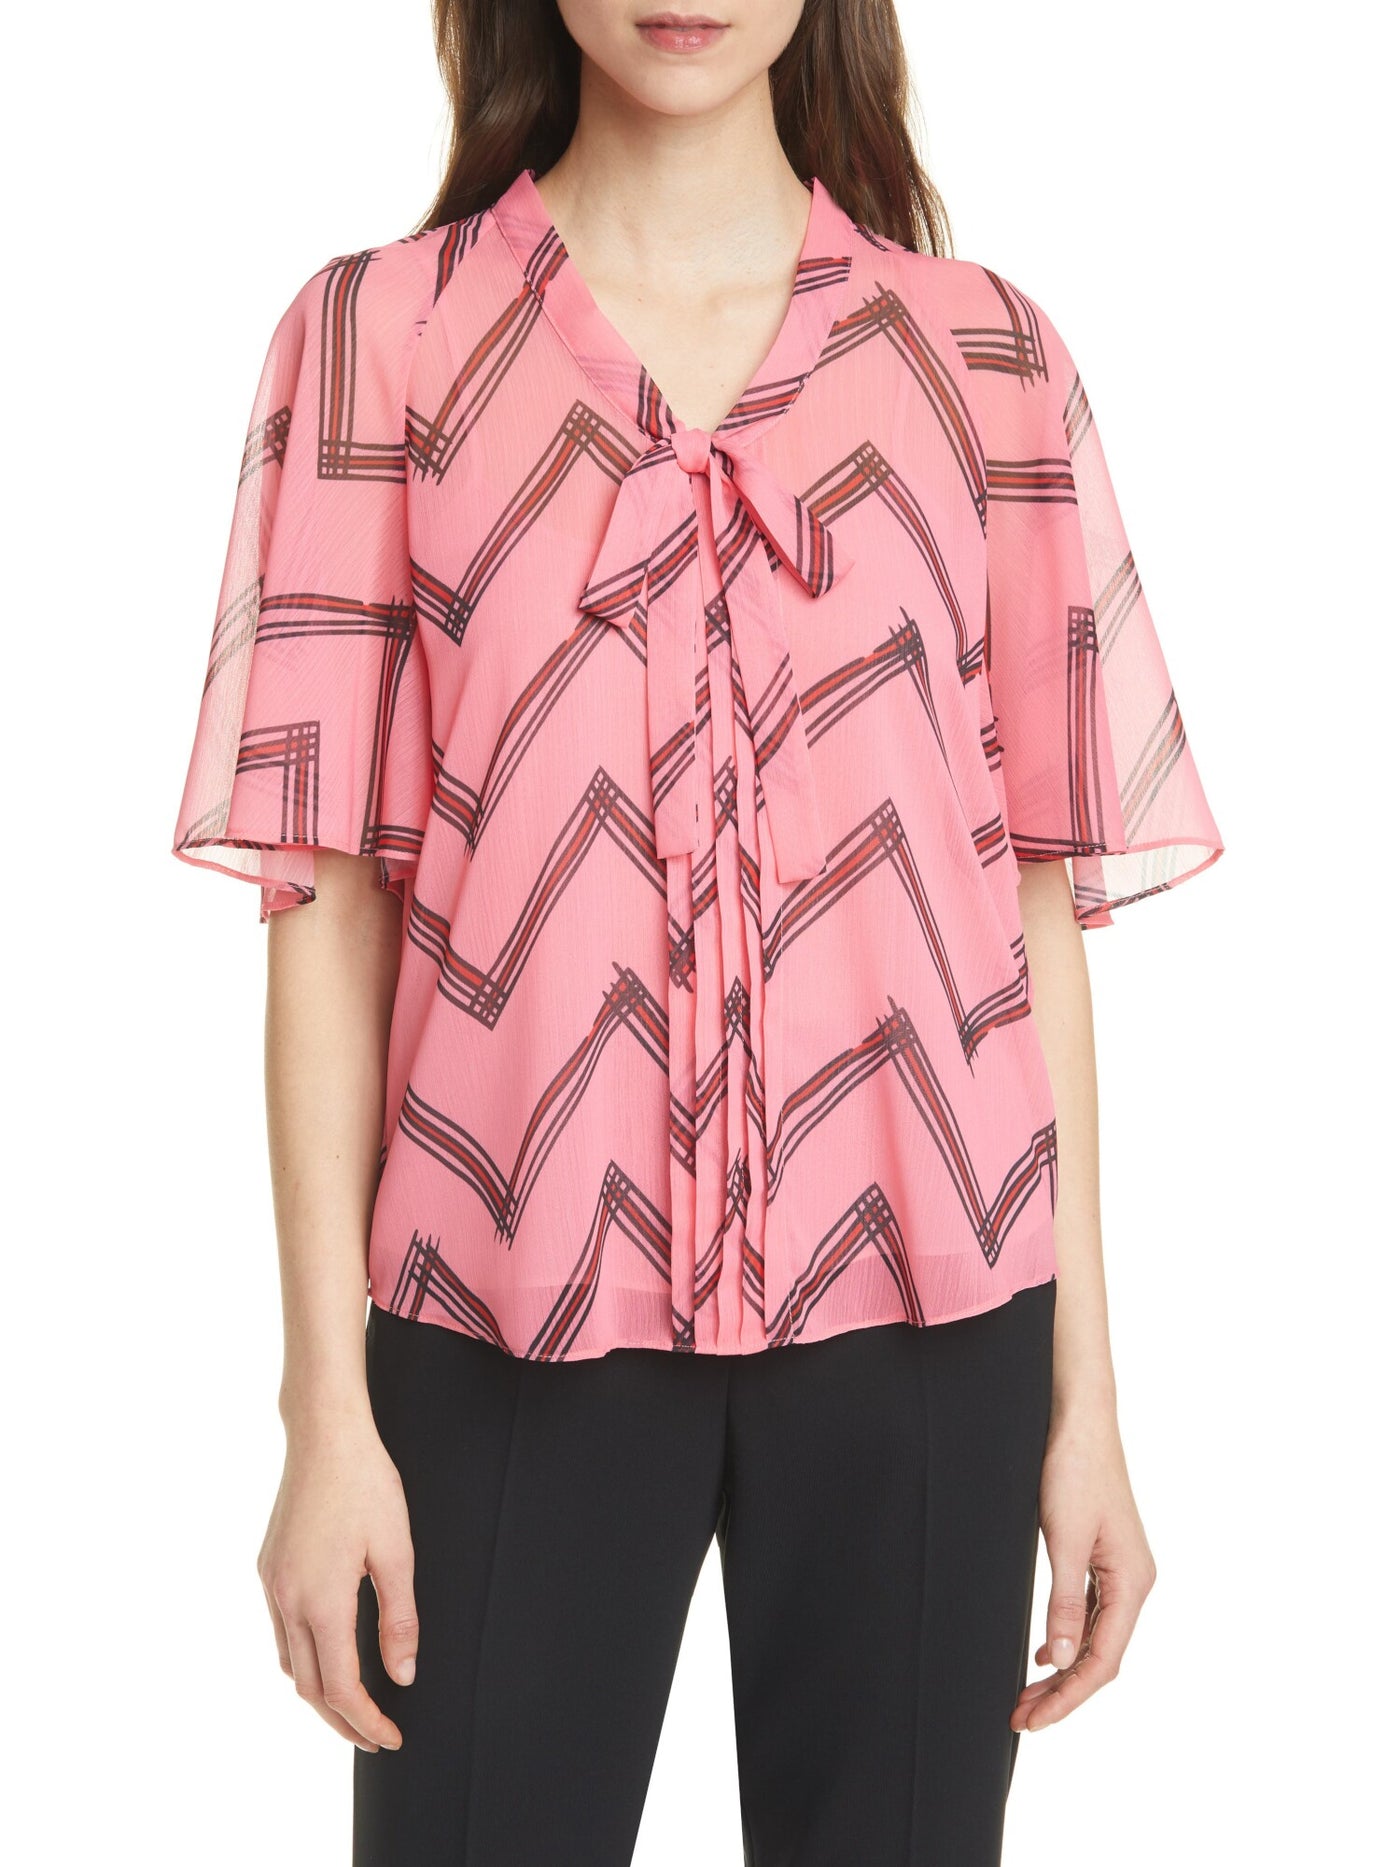 ARMANI Womens Pink Sheer Flutter Printed Short Sleeve Tie Neck Top Size: 42